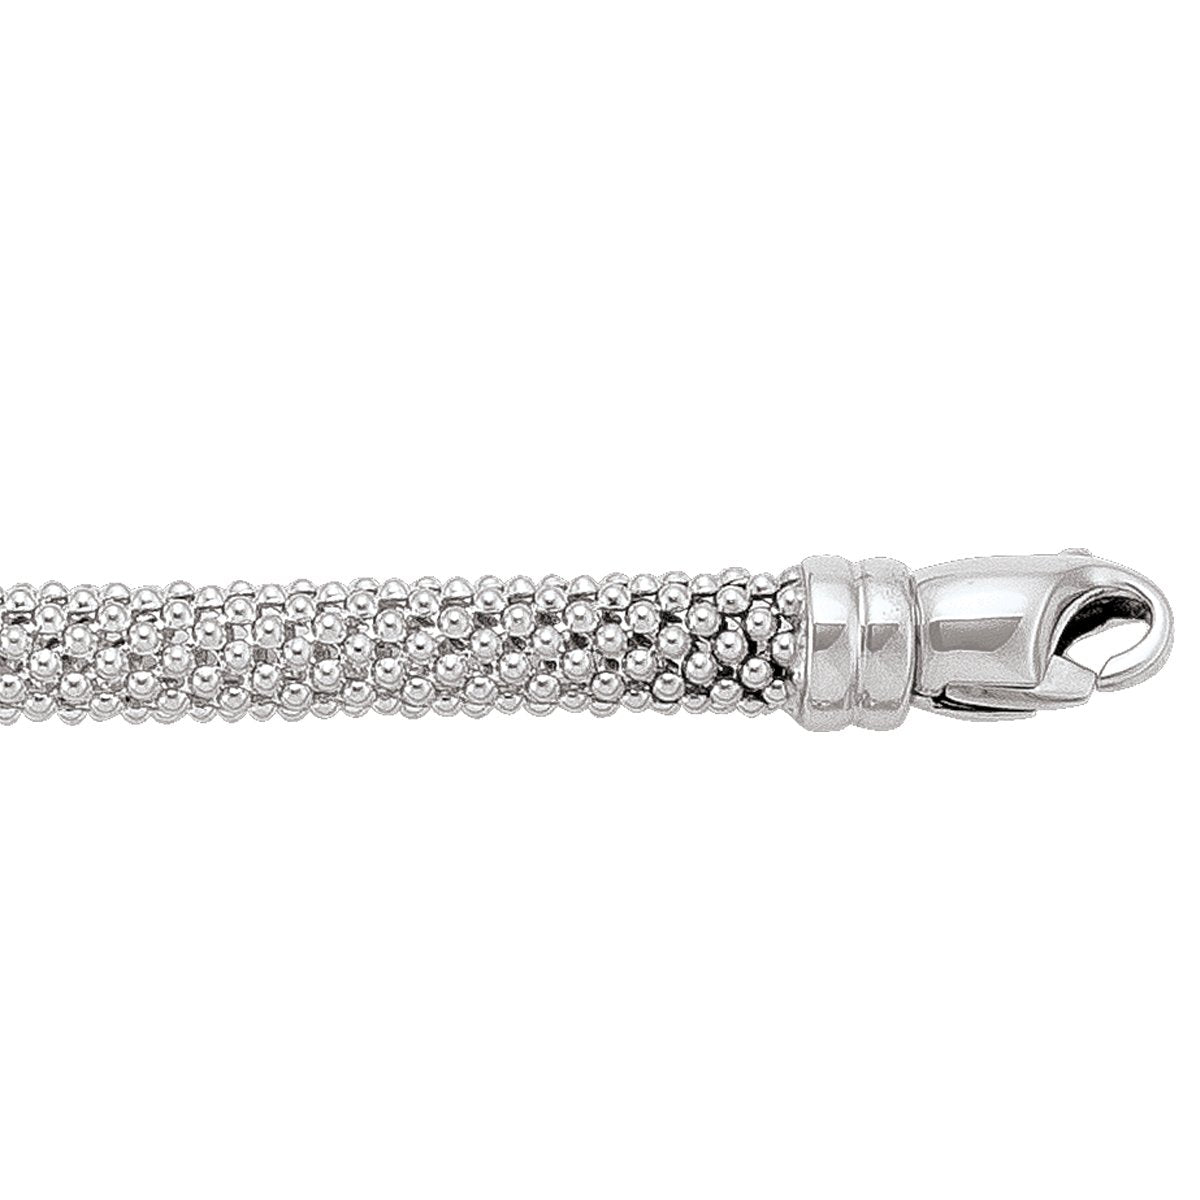 BRACELETS WHITE GOLD HOLLOW ROUND MESH FANCY LINK CHAIN